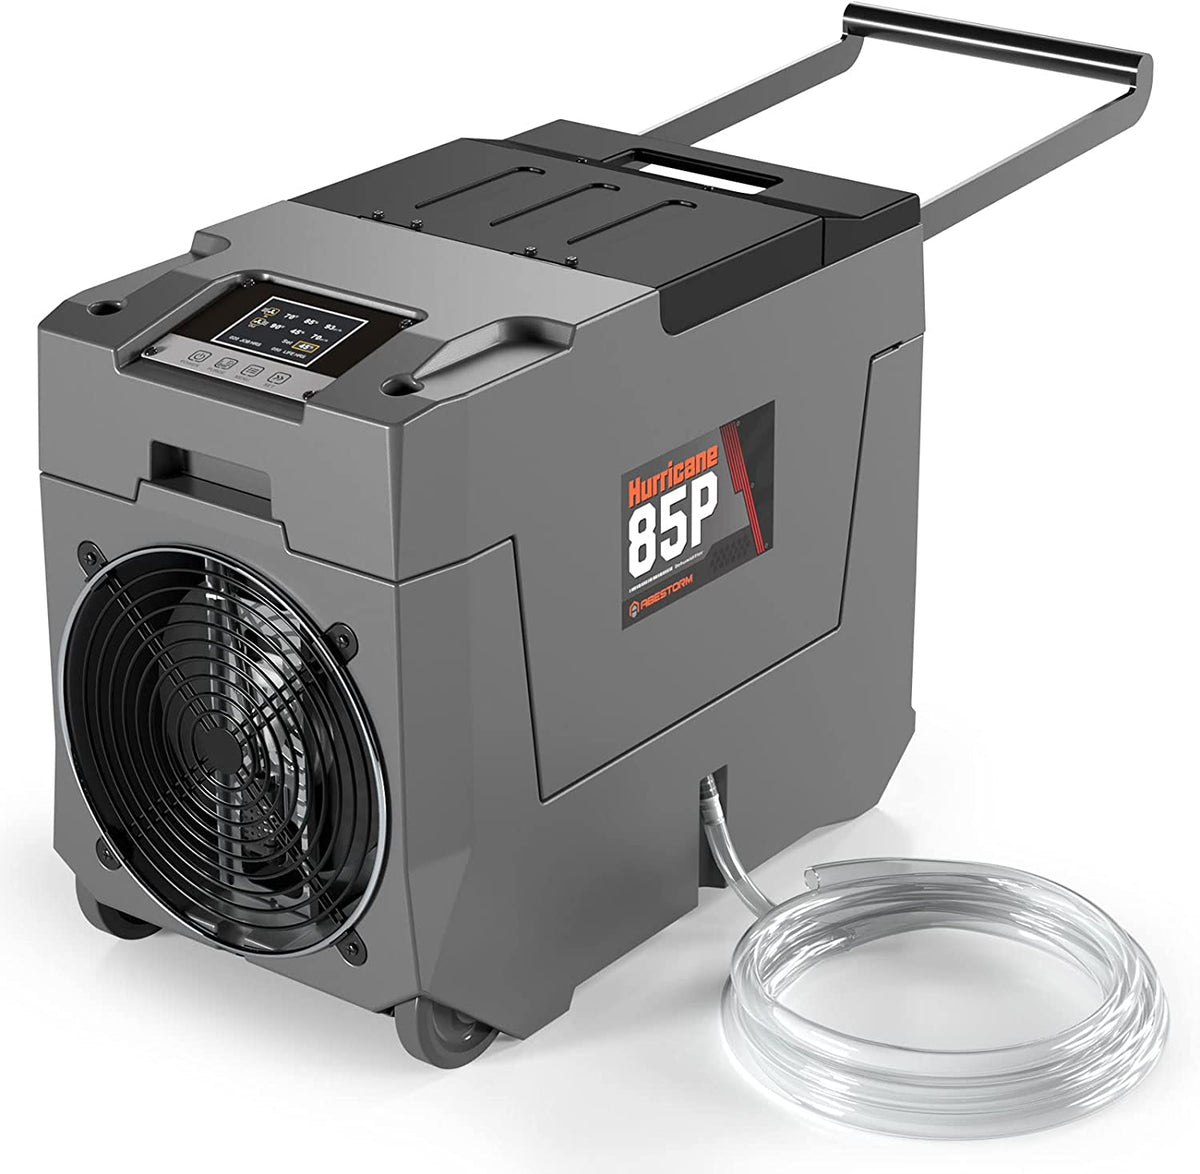 Abestorm 180 PPD Commercial Dehumidifier with Pump